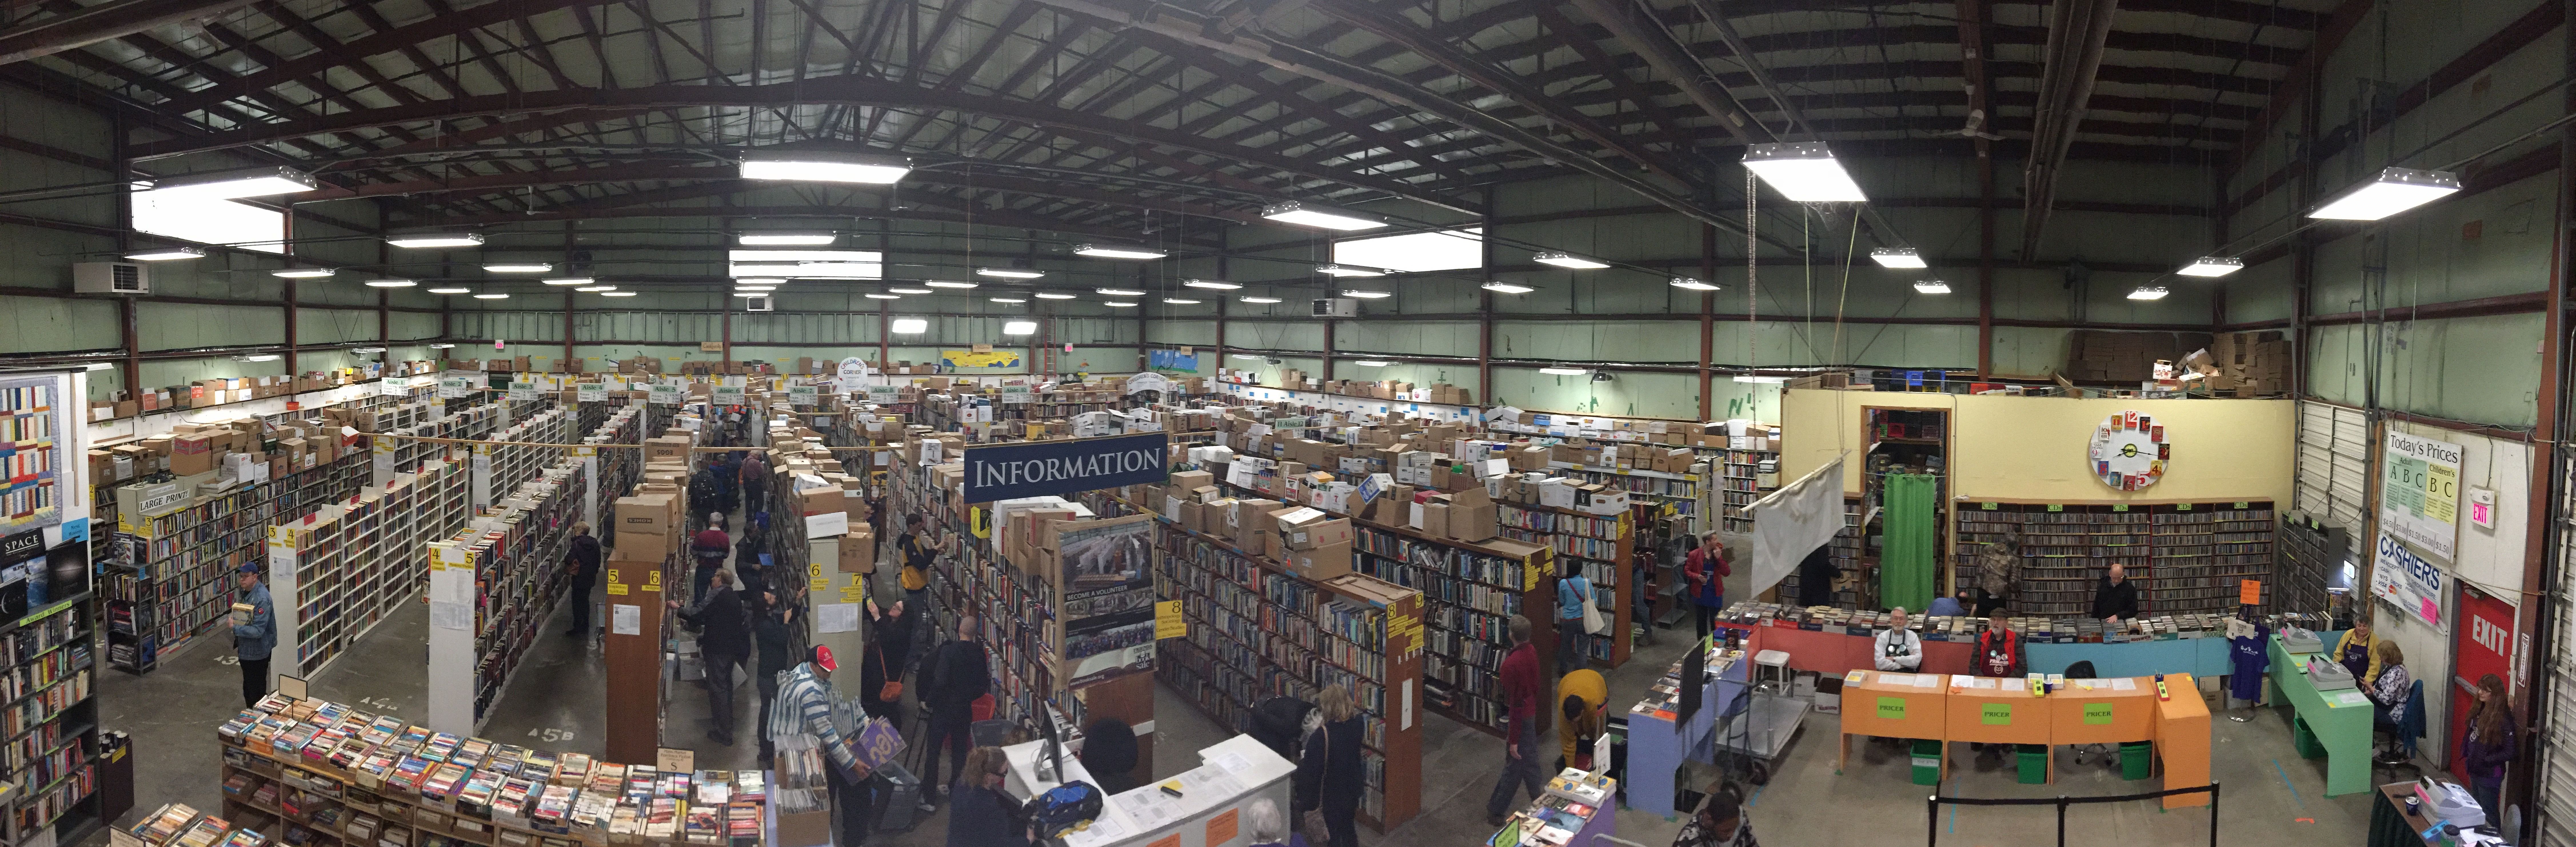 Panoramic image of the inside of the Friends of TCPL Book Sale building